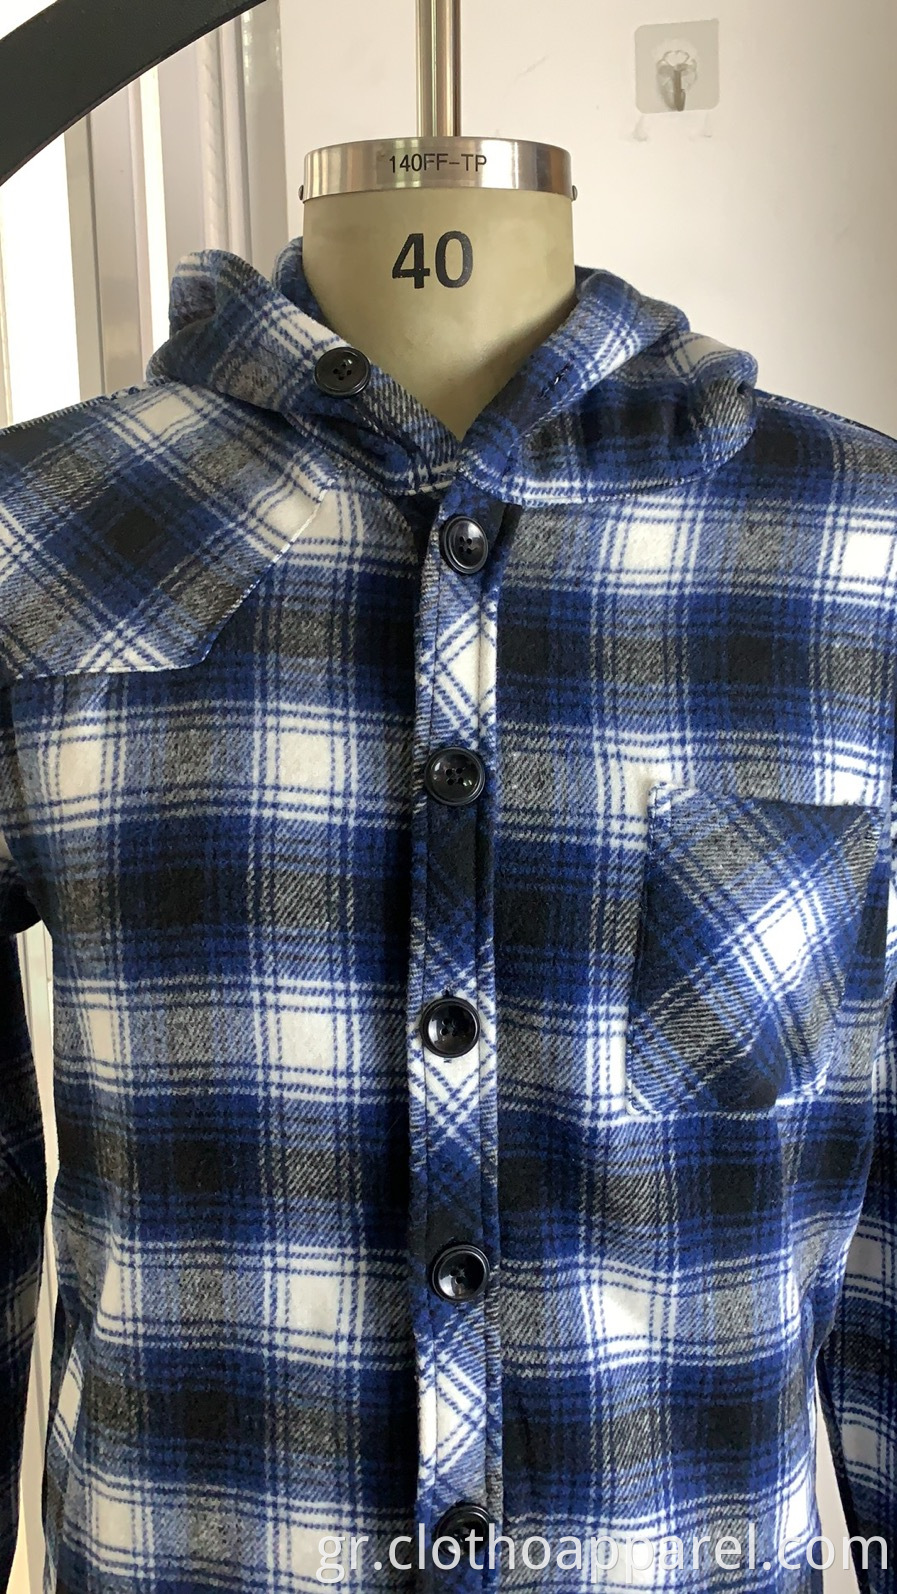 10% Wool 90% Polyester Flannel Hoody Shirt